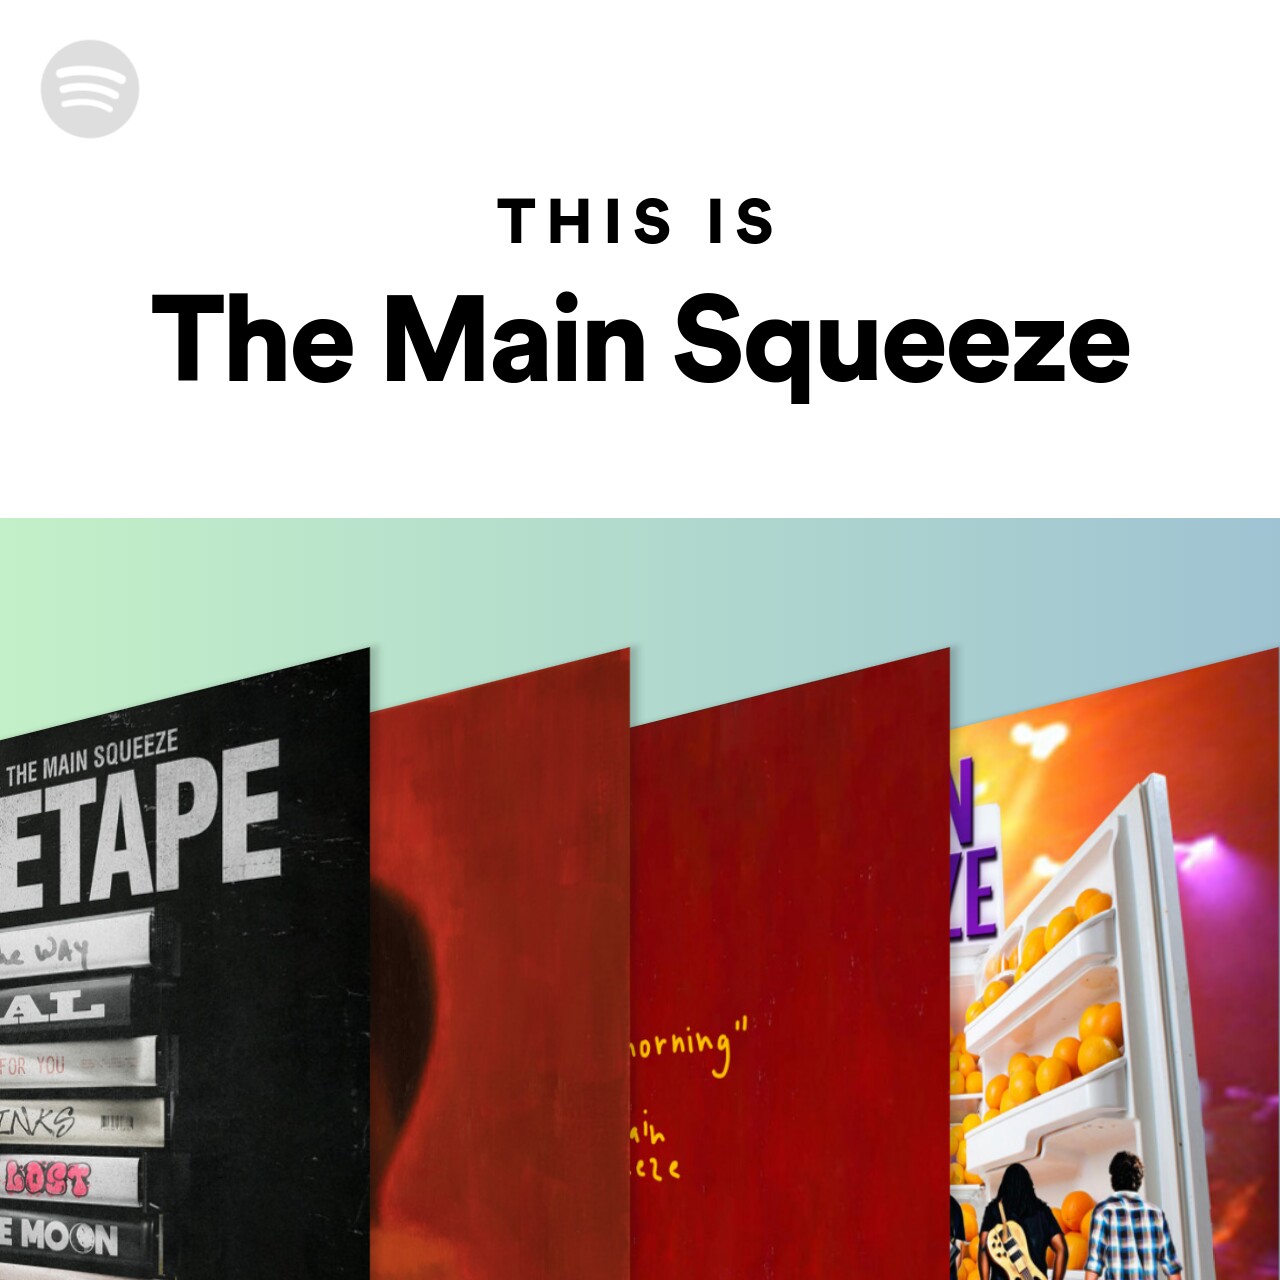 This Is The Main Squeeze Spotify Playlist